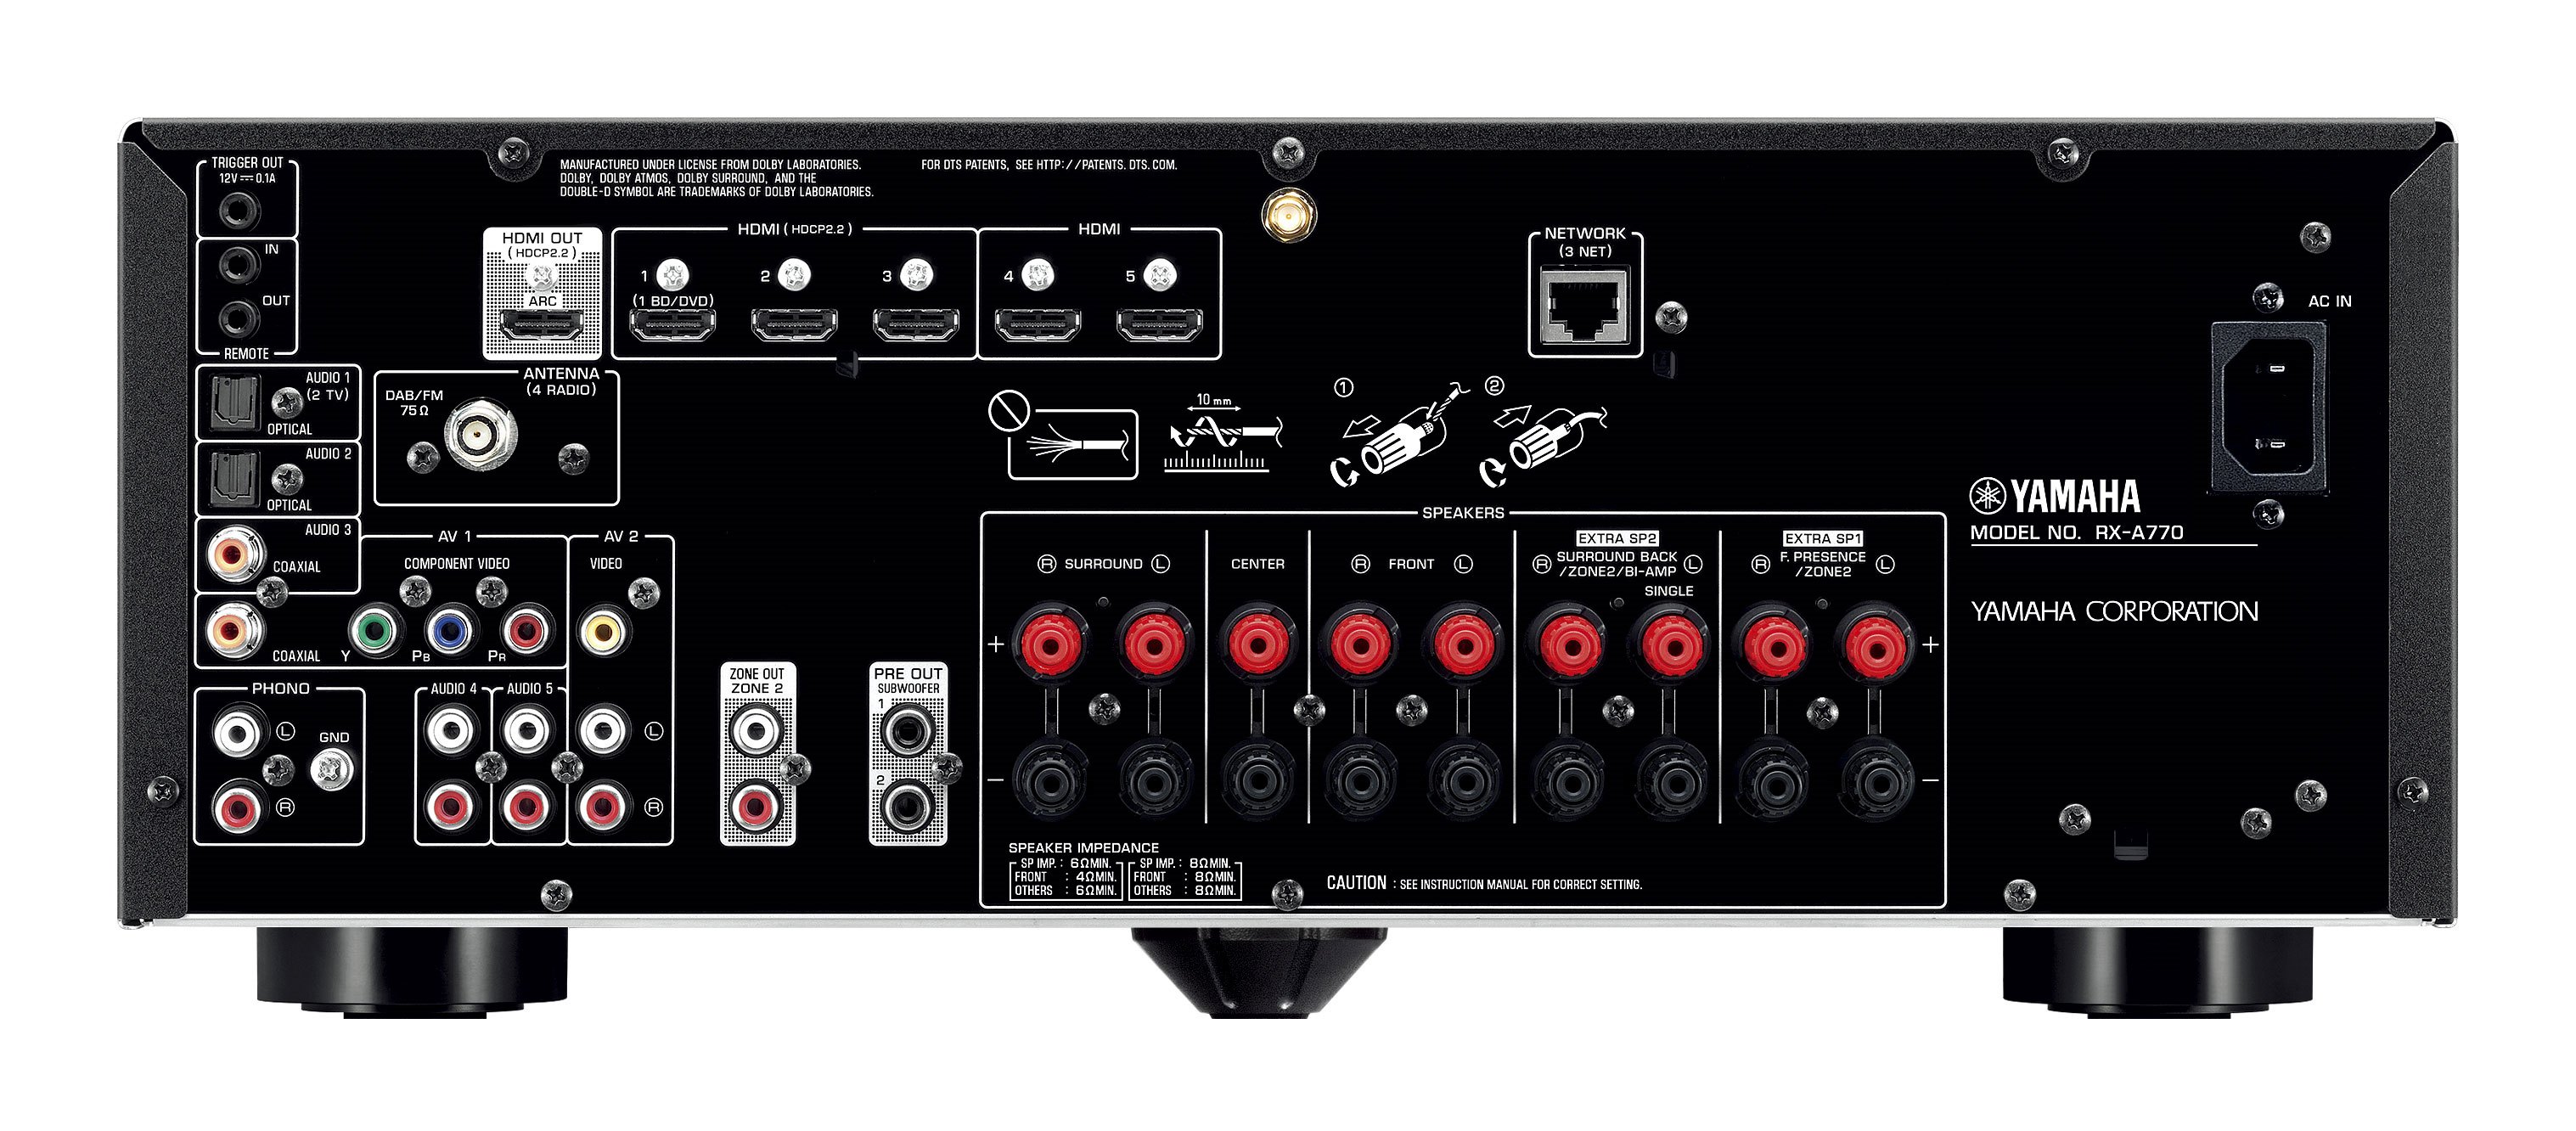 RX-A770 - Overview - AV Receivers - Audio & Visual - Products 